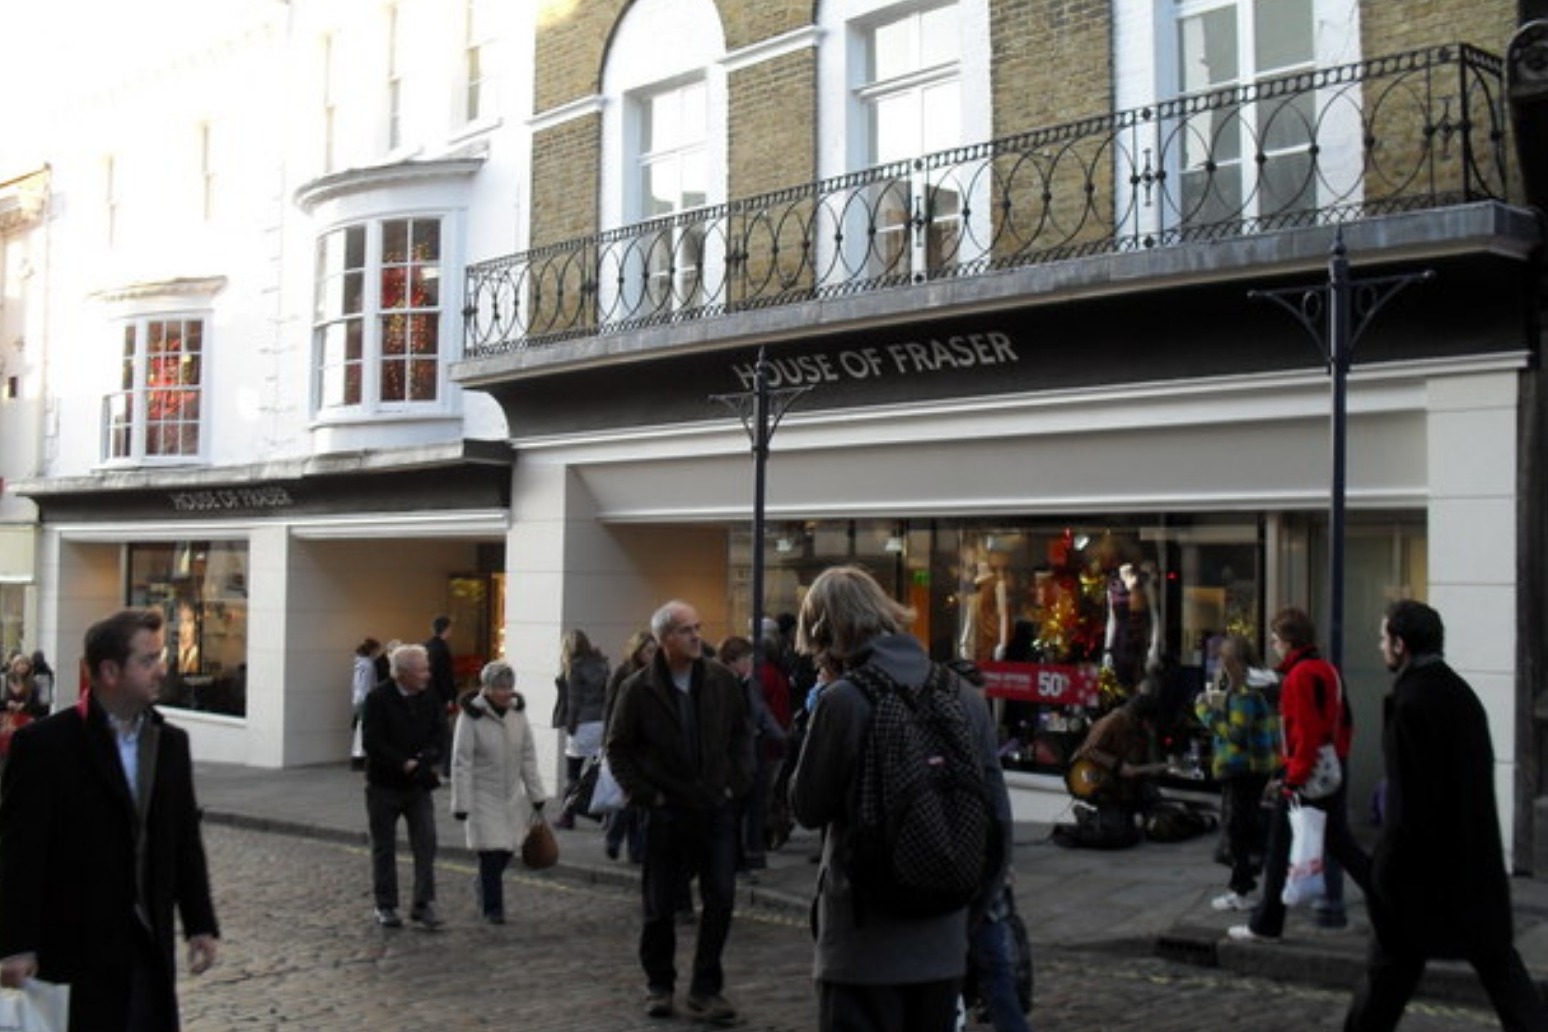 House of Fraser appoints administrators leaving 1700 jobs at risk 